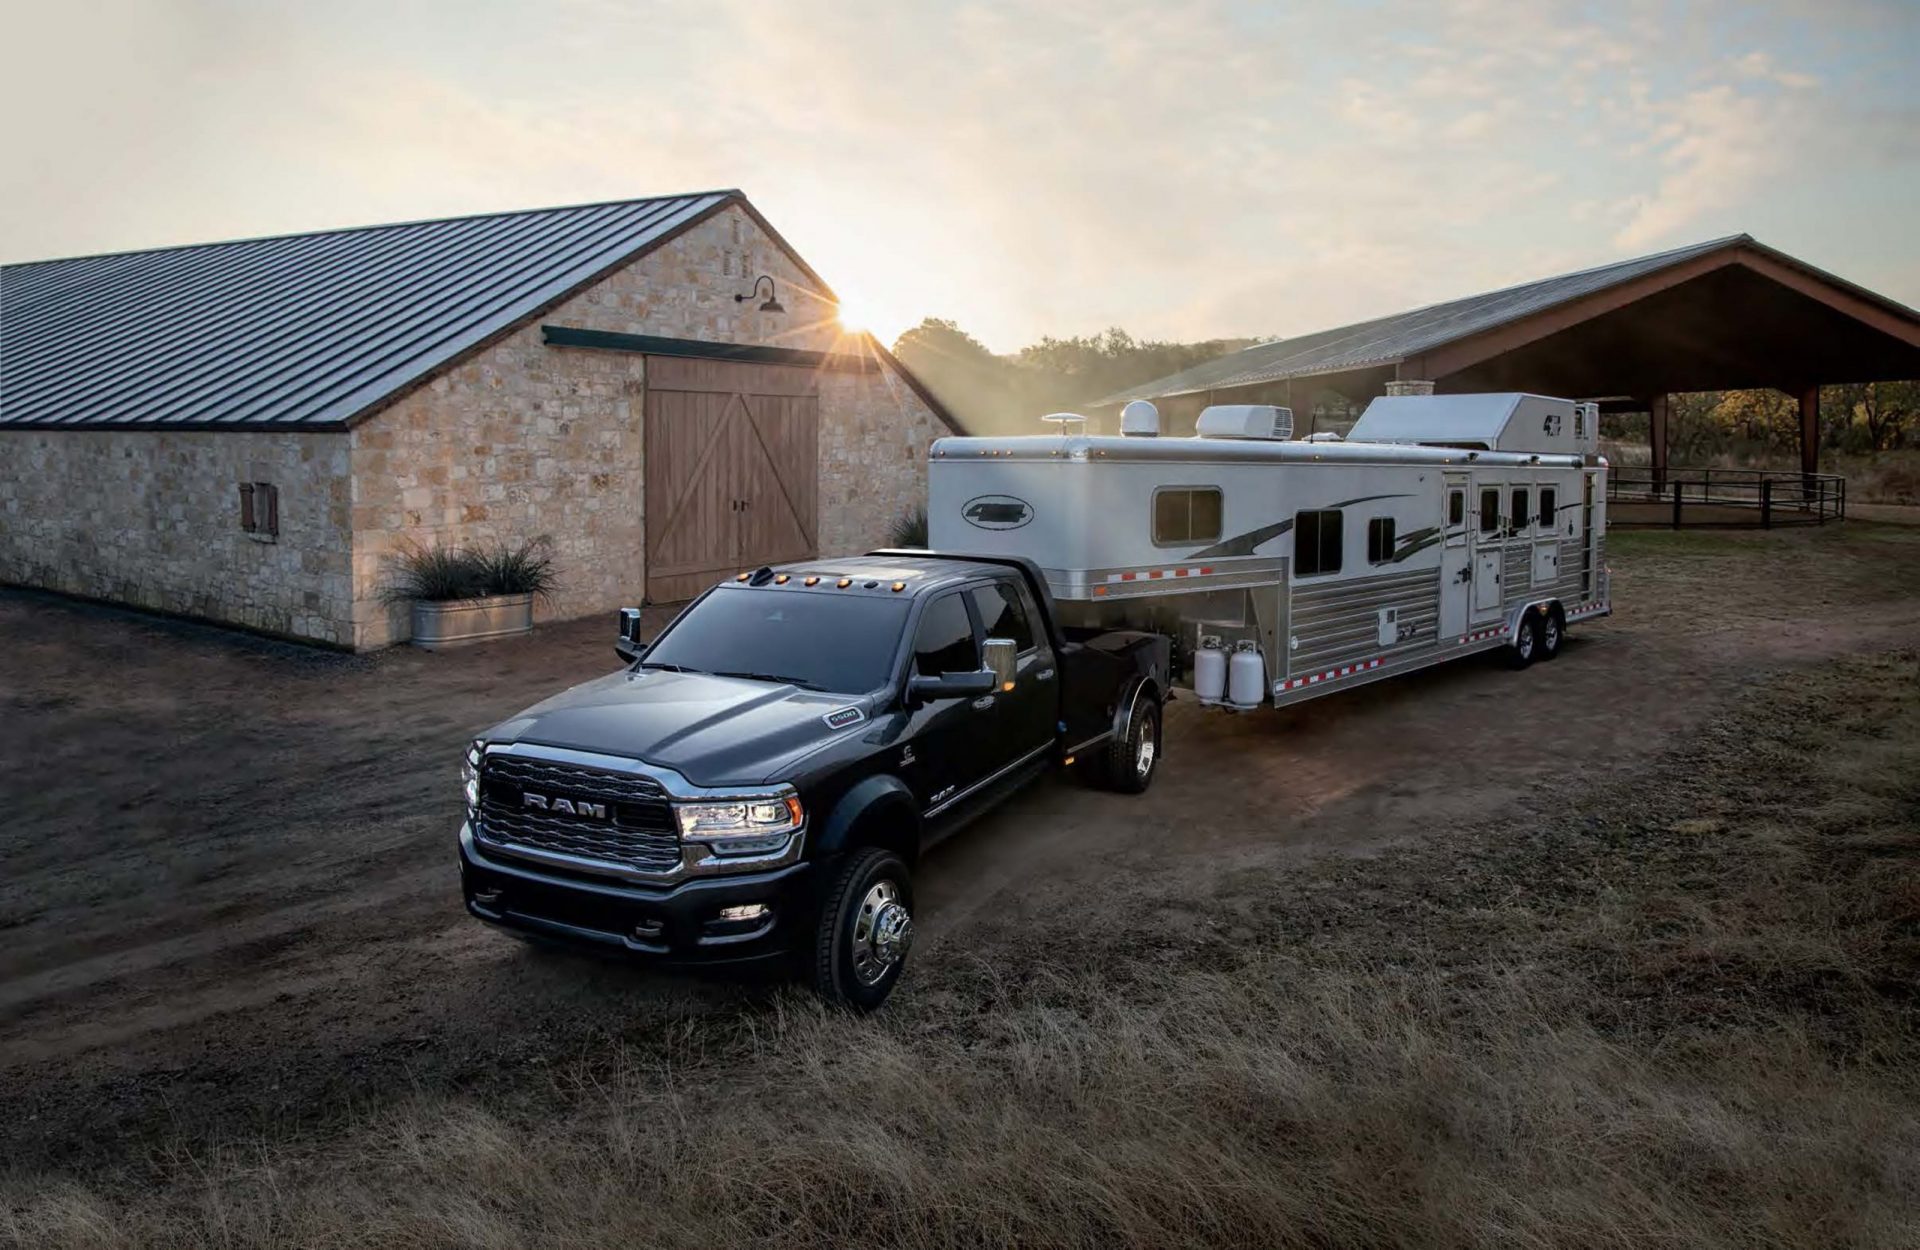 Dodge Vs Ram truck for towing